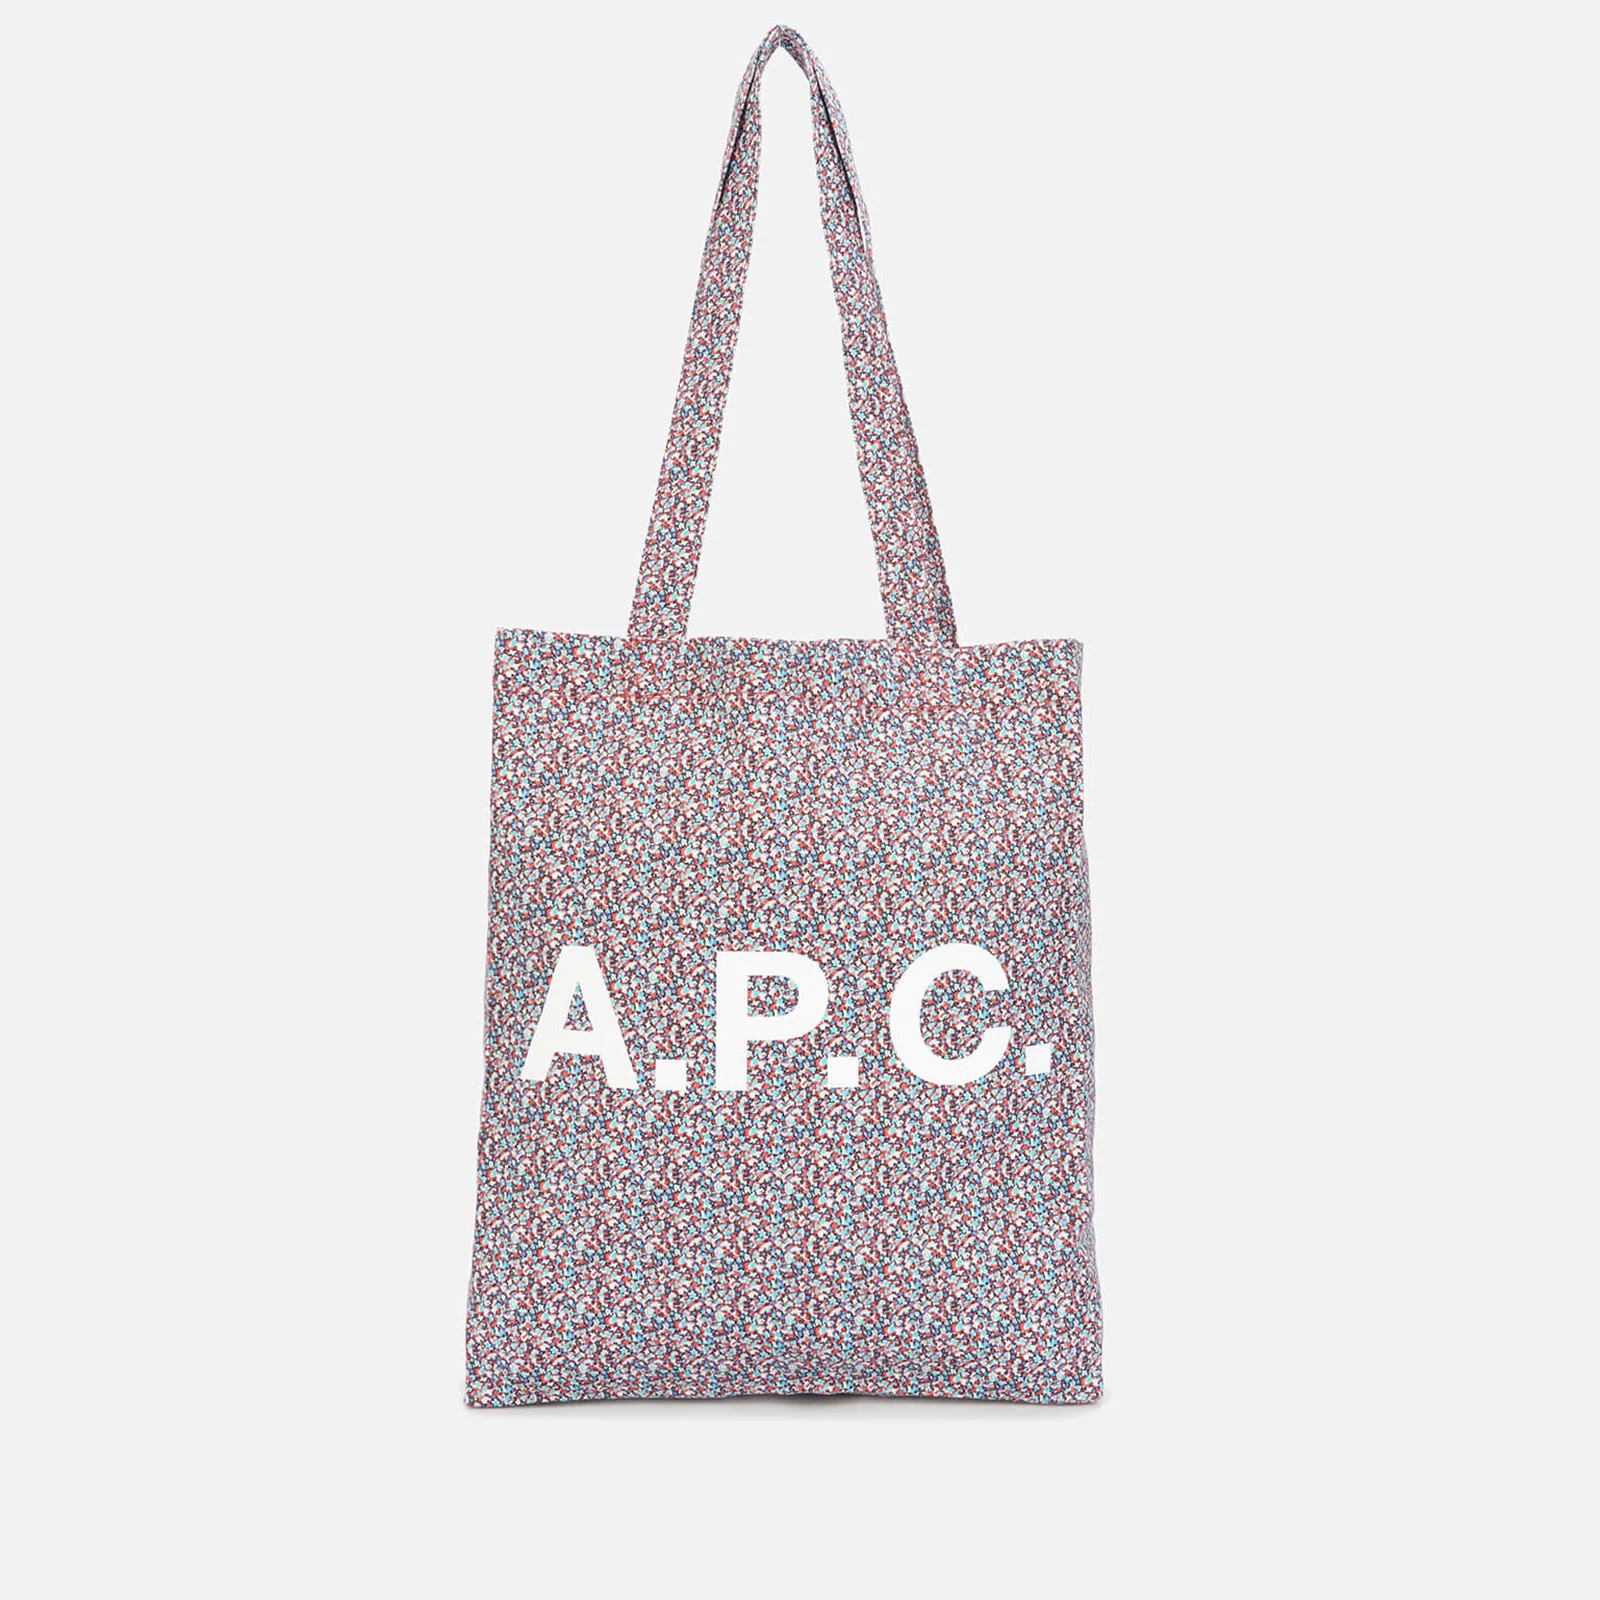 A.P.C. Women's Lou Tote Bag - Red Image 1